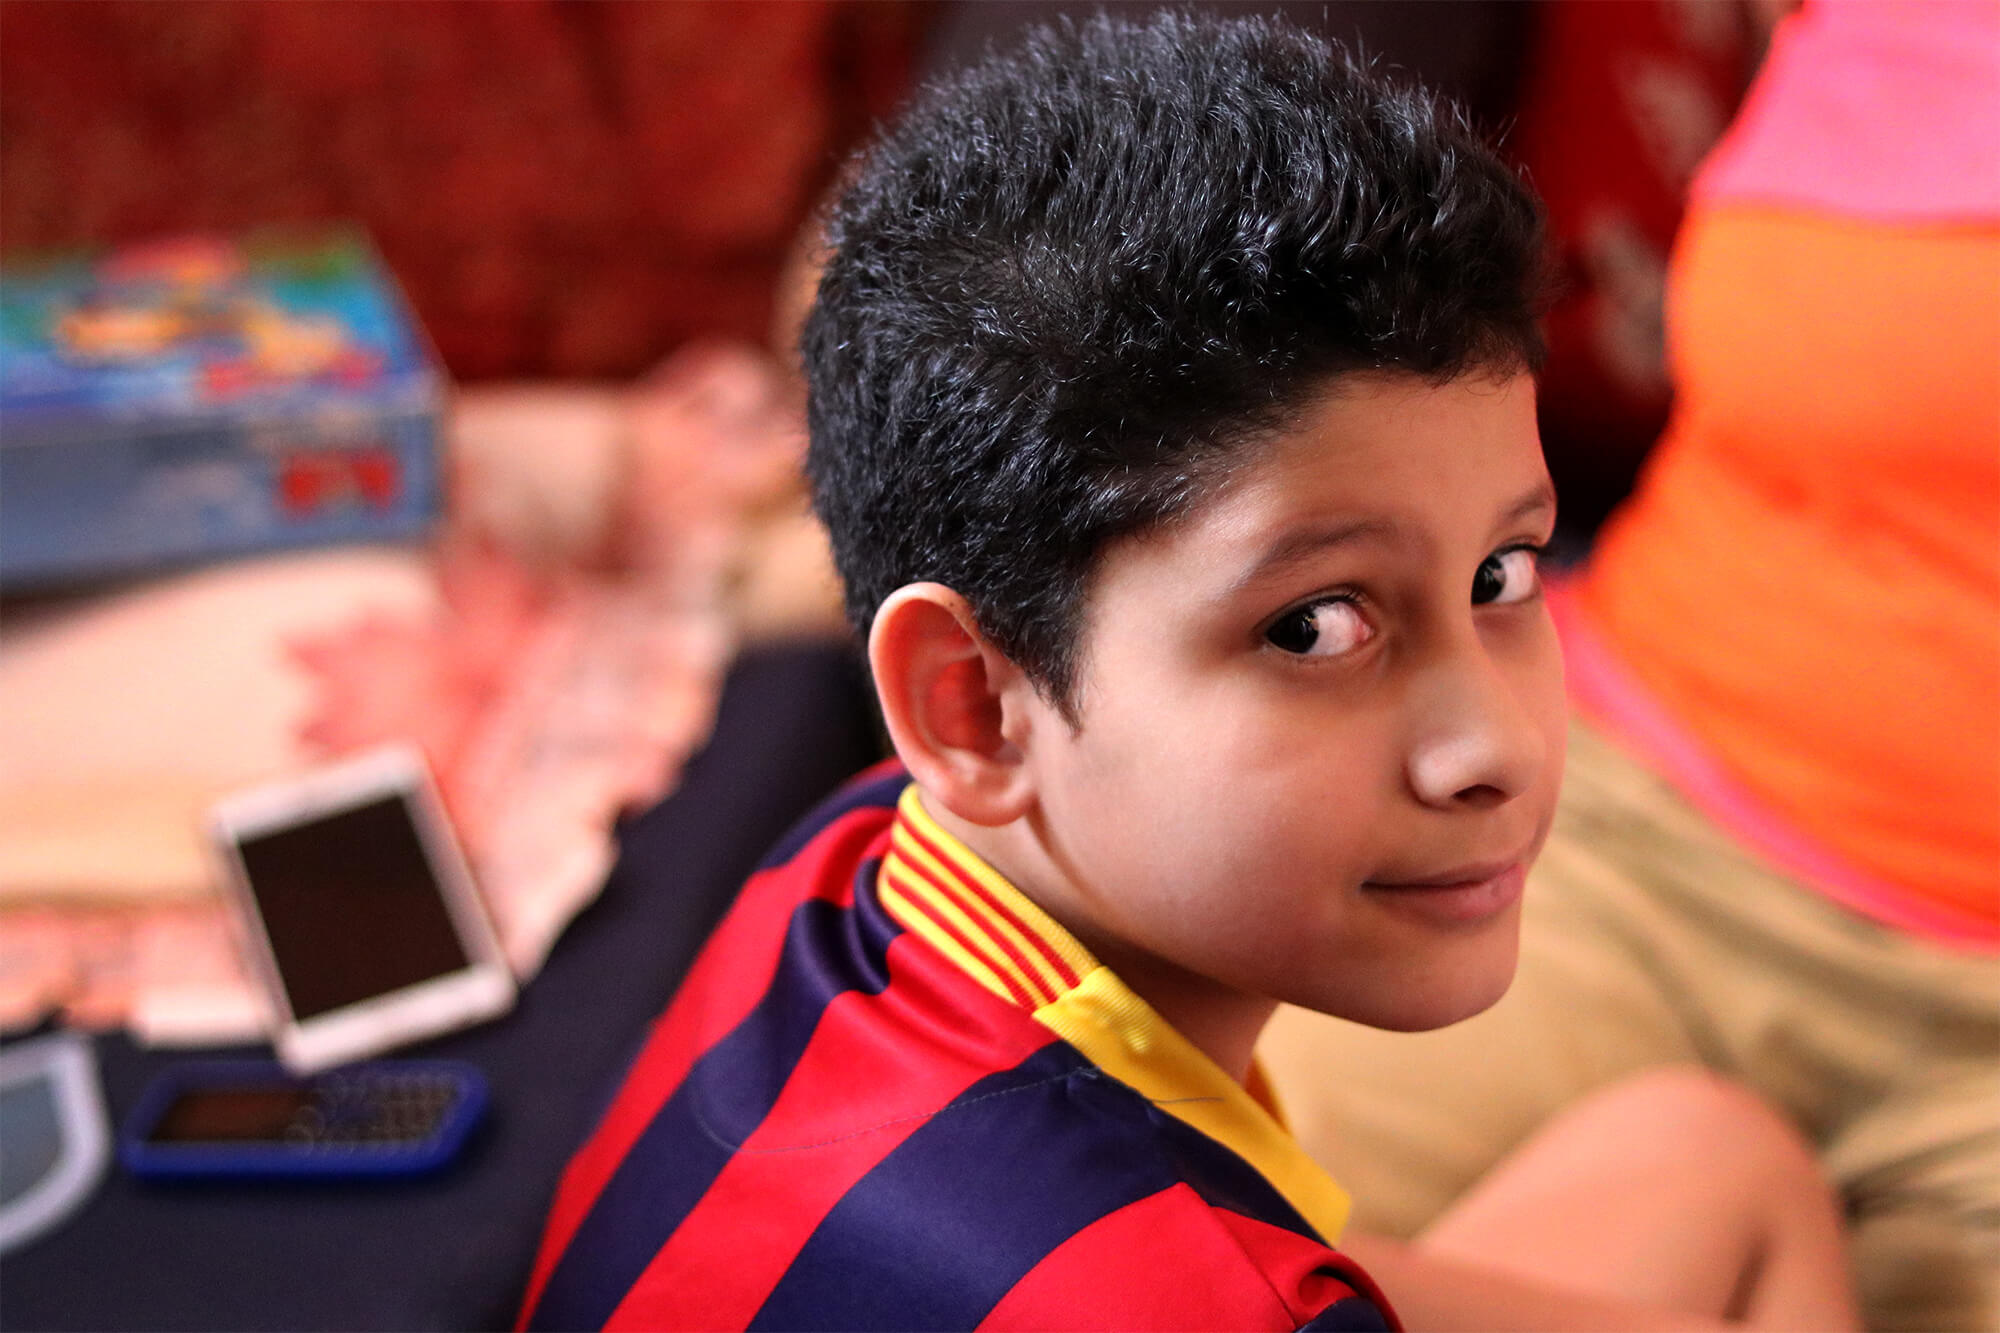 A young boy named Jeham Carlos looks over his shoulder at the camera. He wears a red and navy striped futbol jersey.